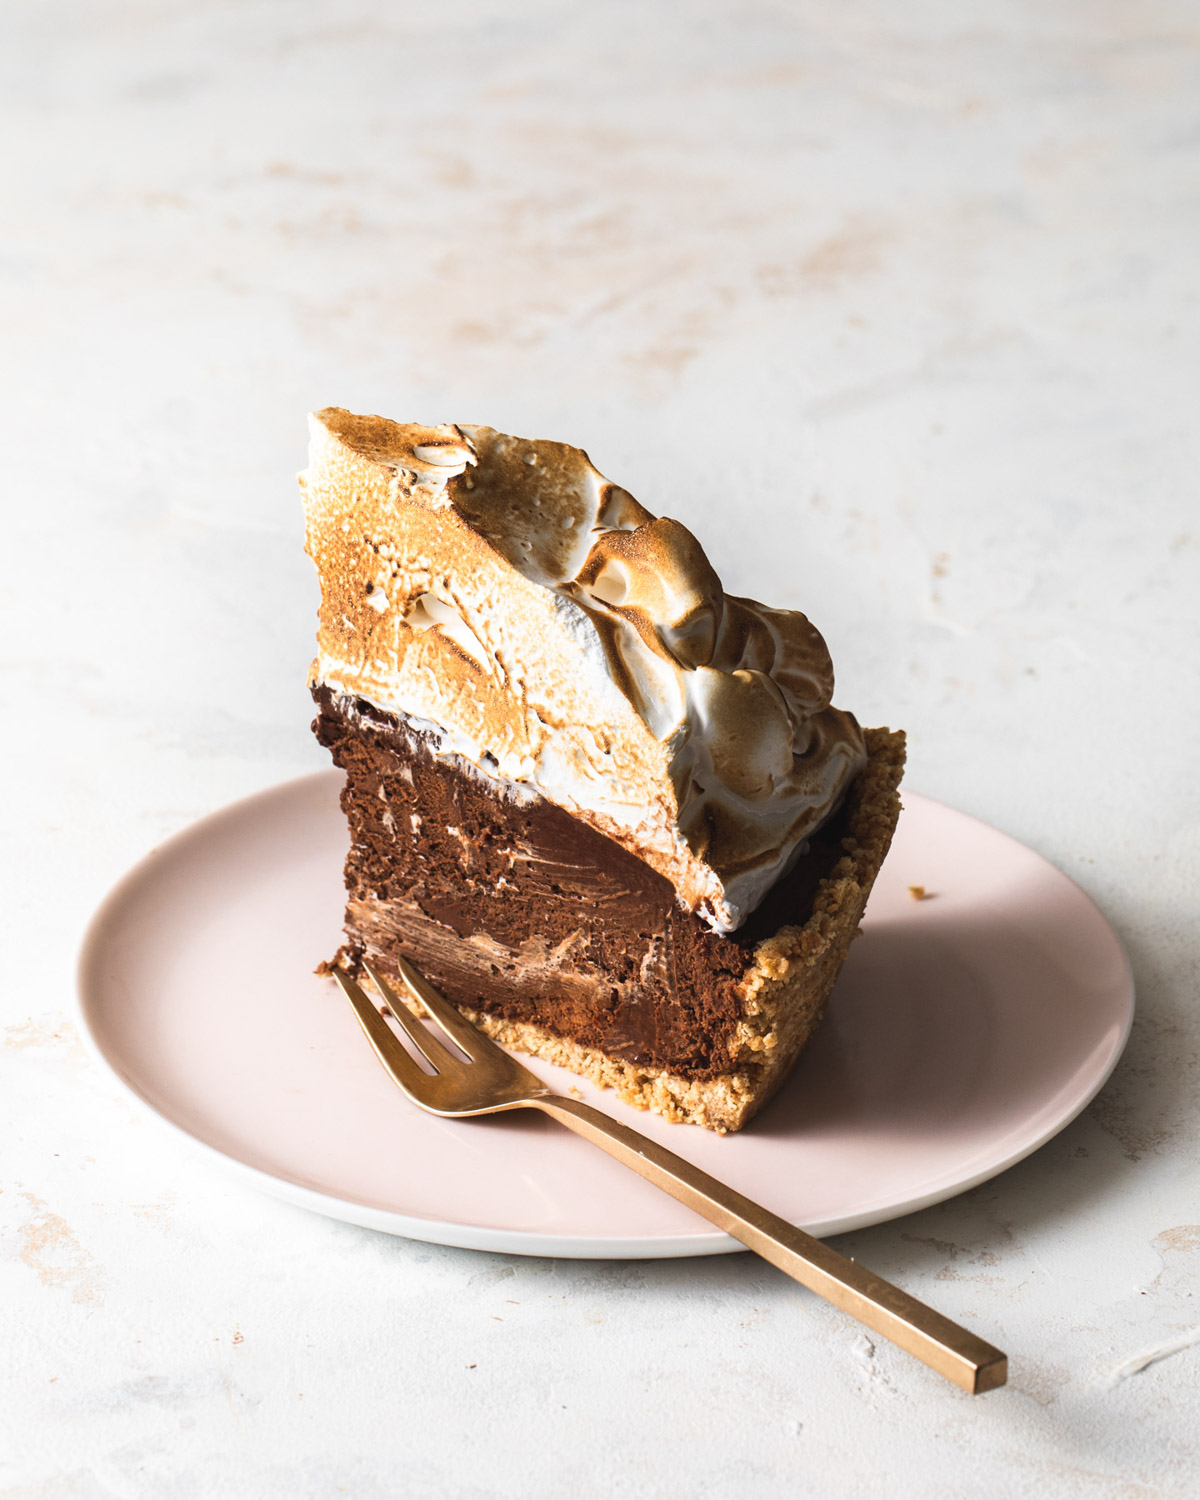 A slice of peanut butter s'mores pie with toasted meringue topping